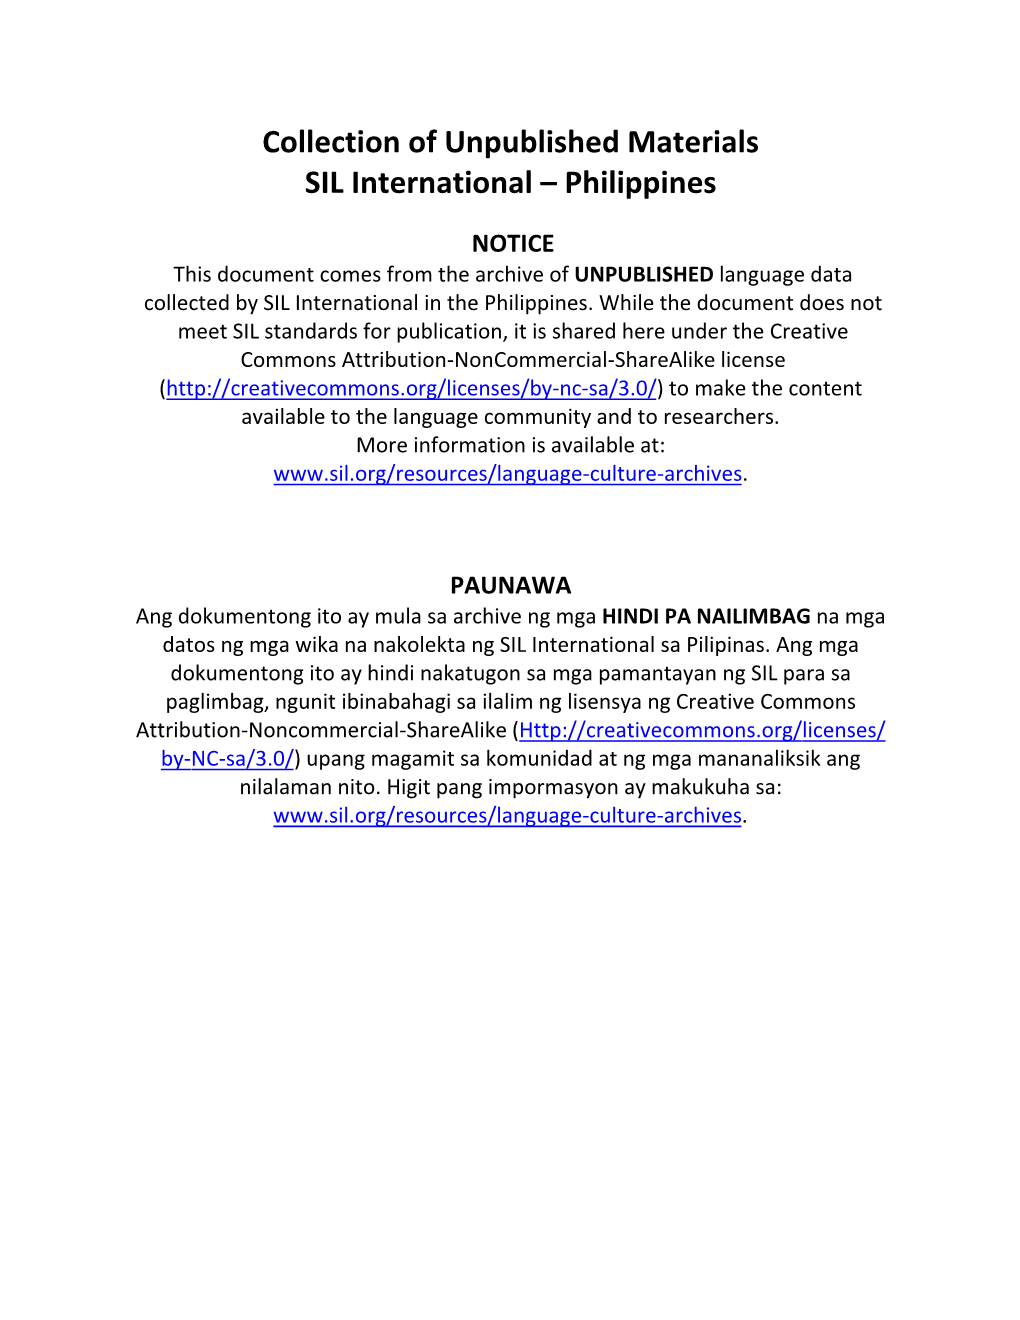 Collection of Unpublished Materials SIL International – Philippines